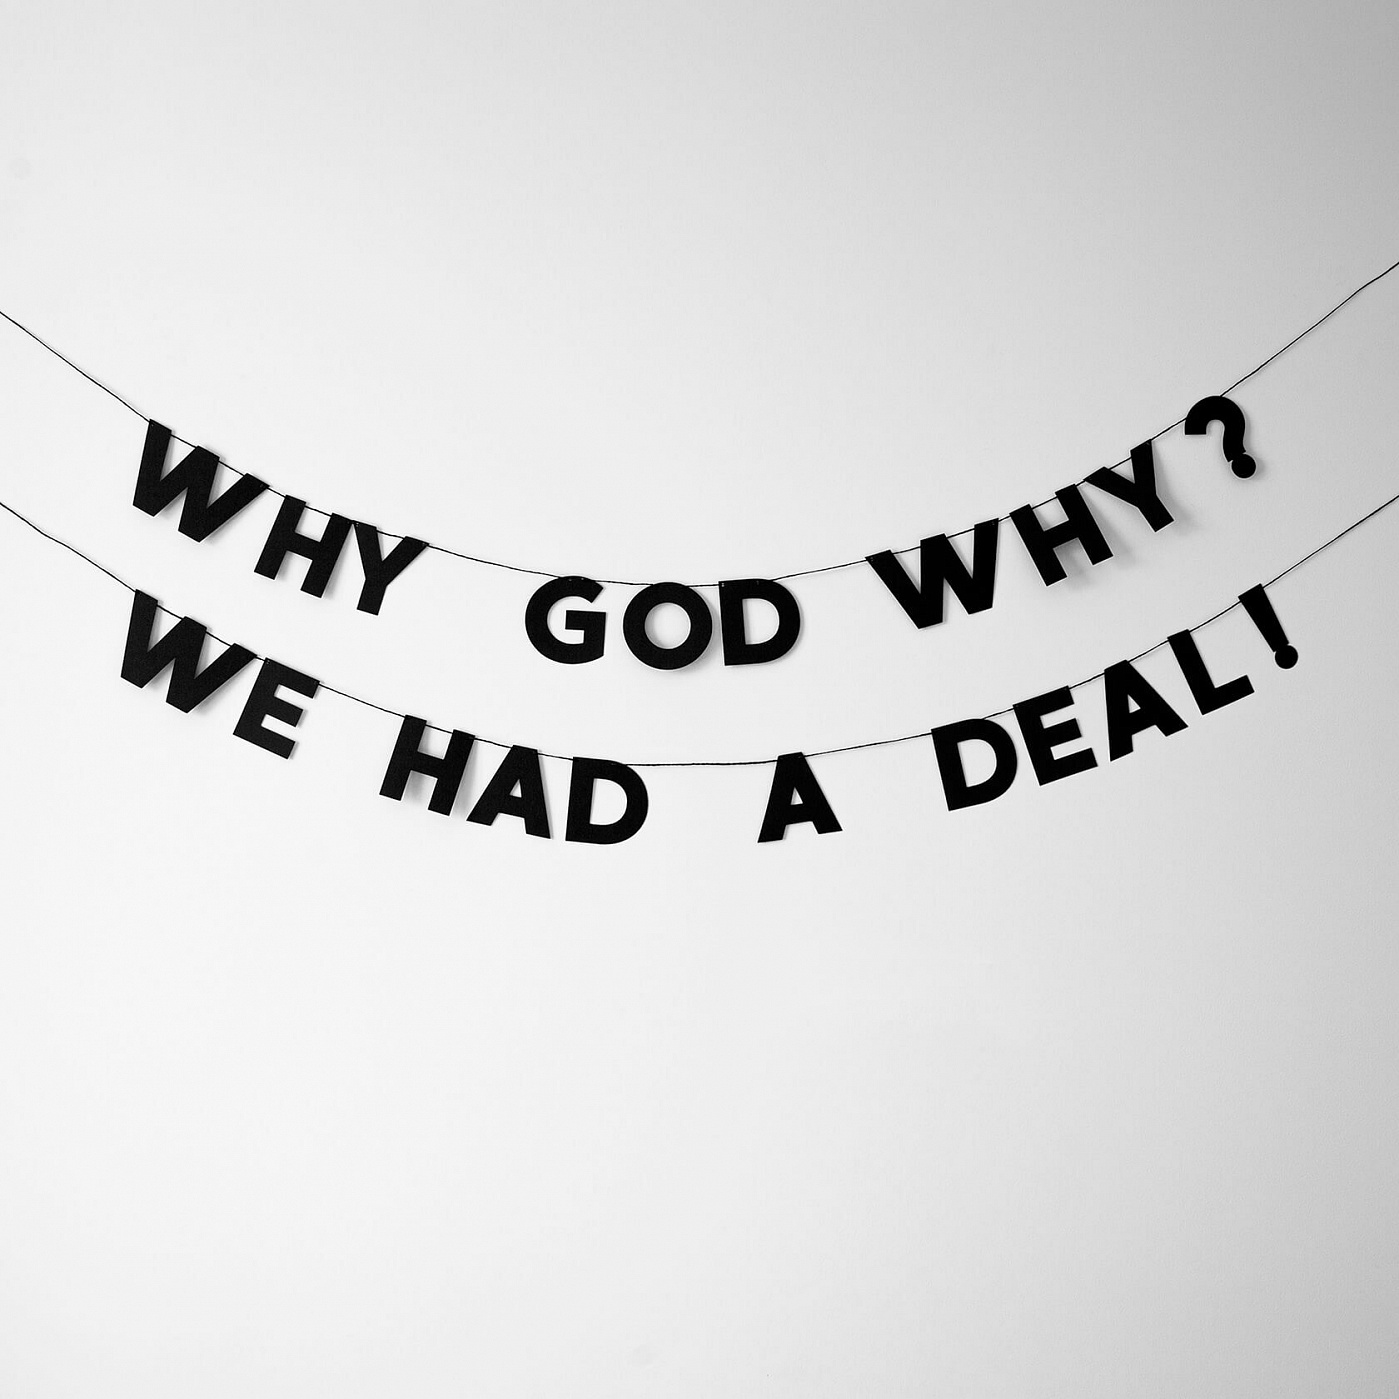  WHY GOD WHY? WE HAD A DEAL!